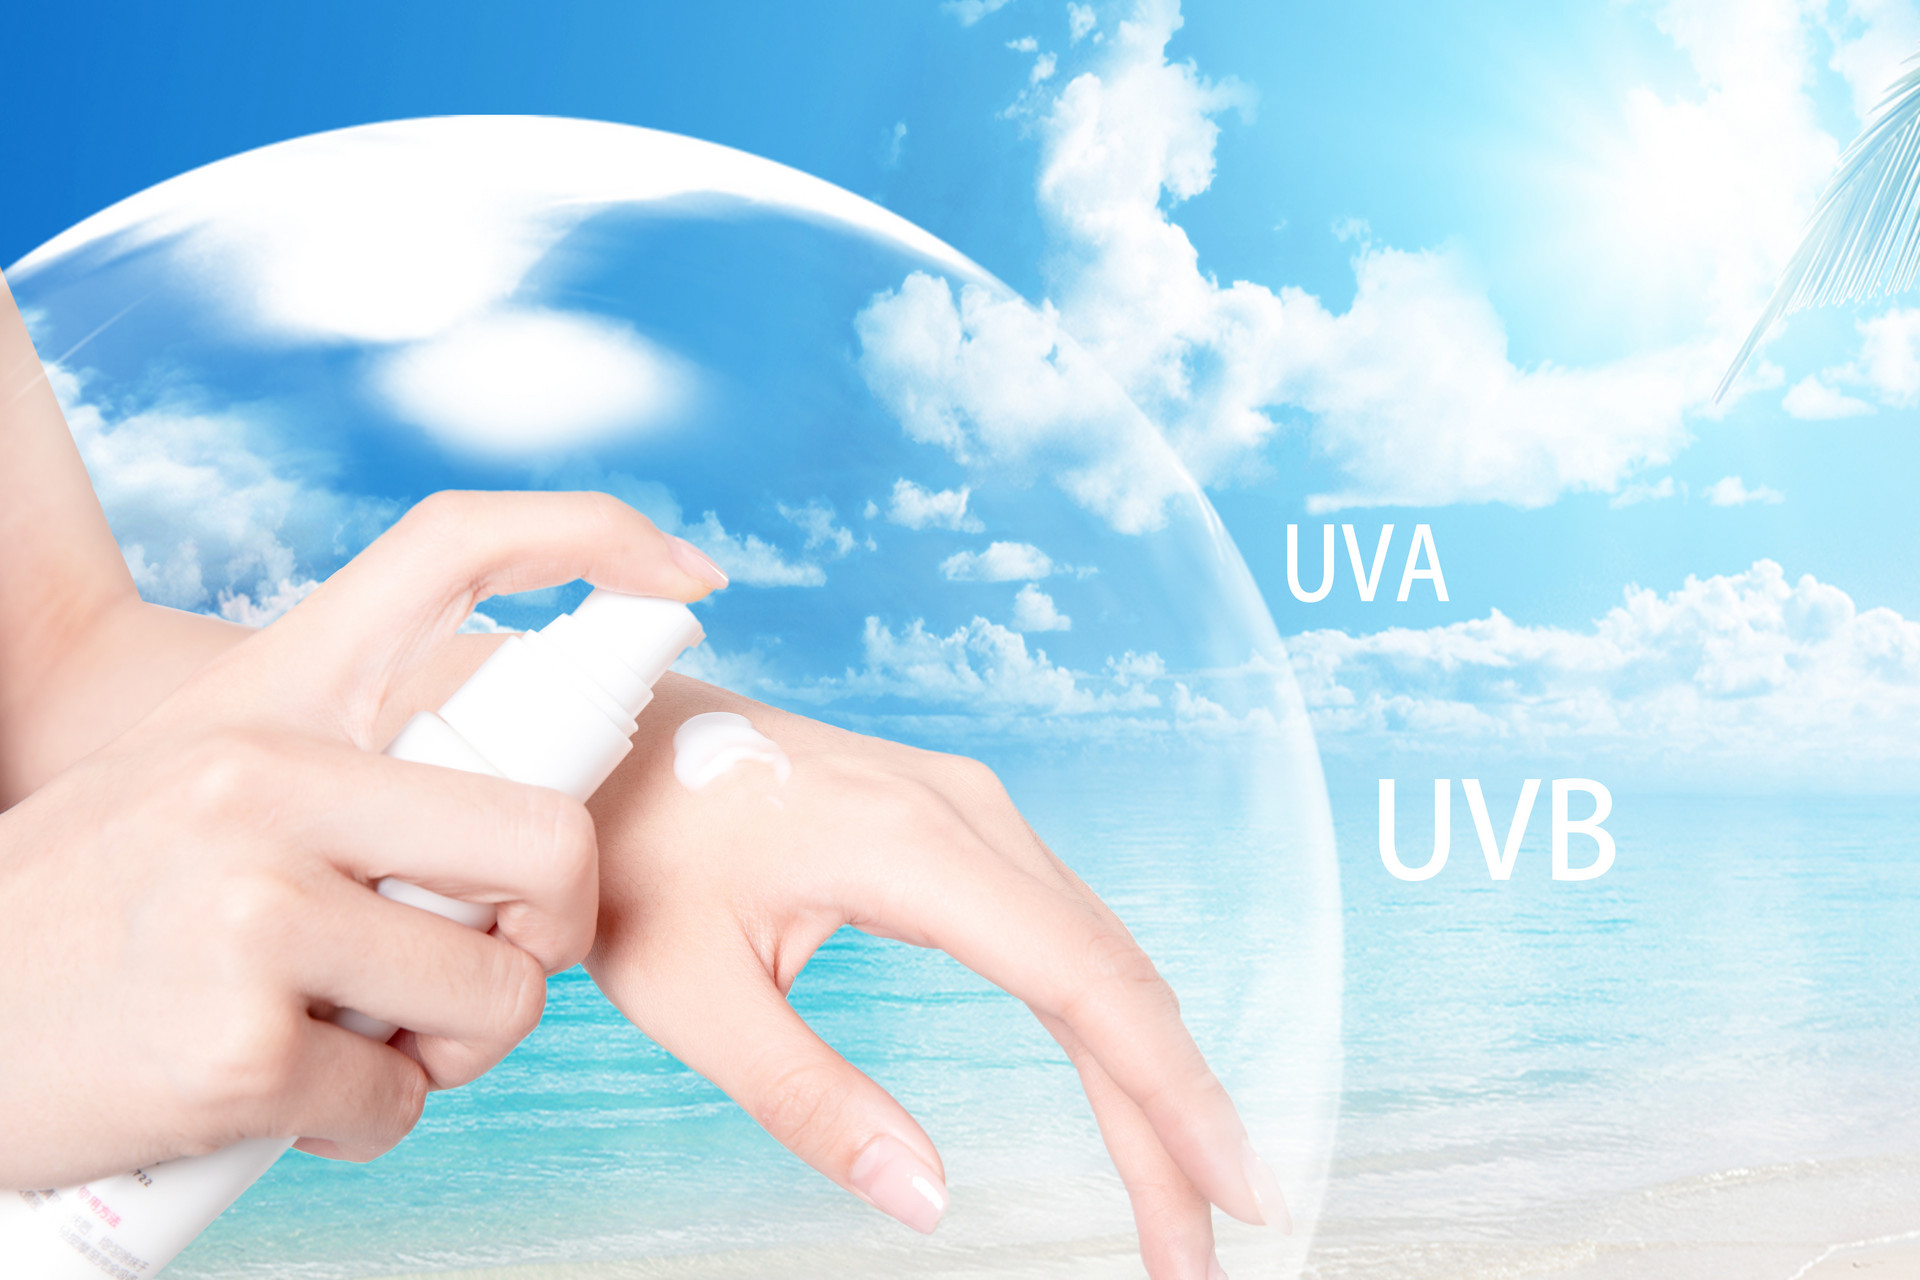 SUNSCREEN AGENTS: HIGH-QUALITY COSMETIC RAW MATERIALS, HIGH CONCENTRATION AND GREAT POTENTIAL